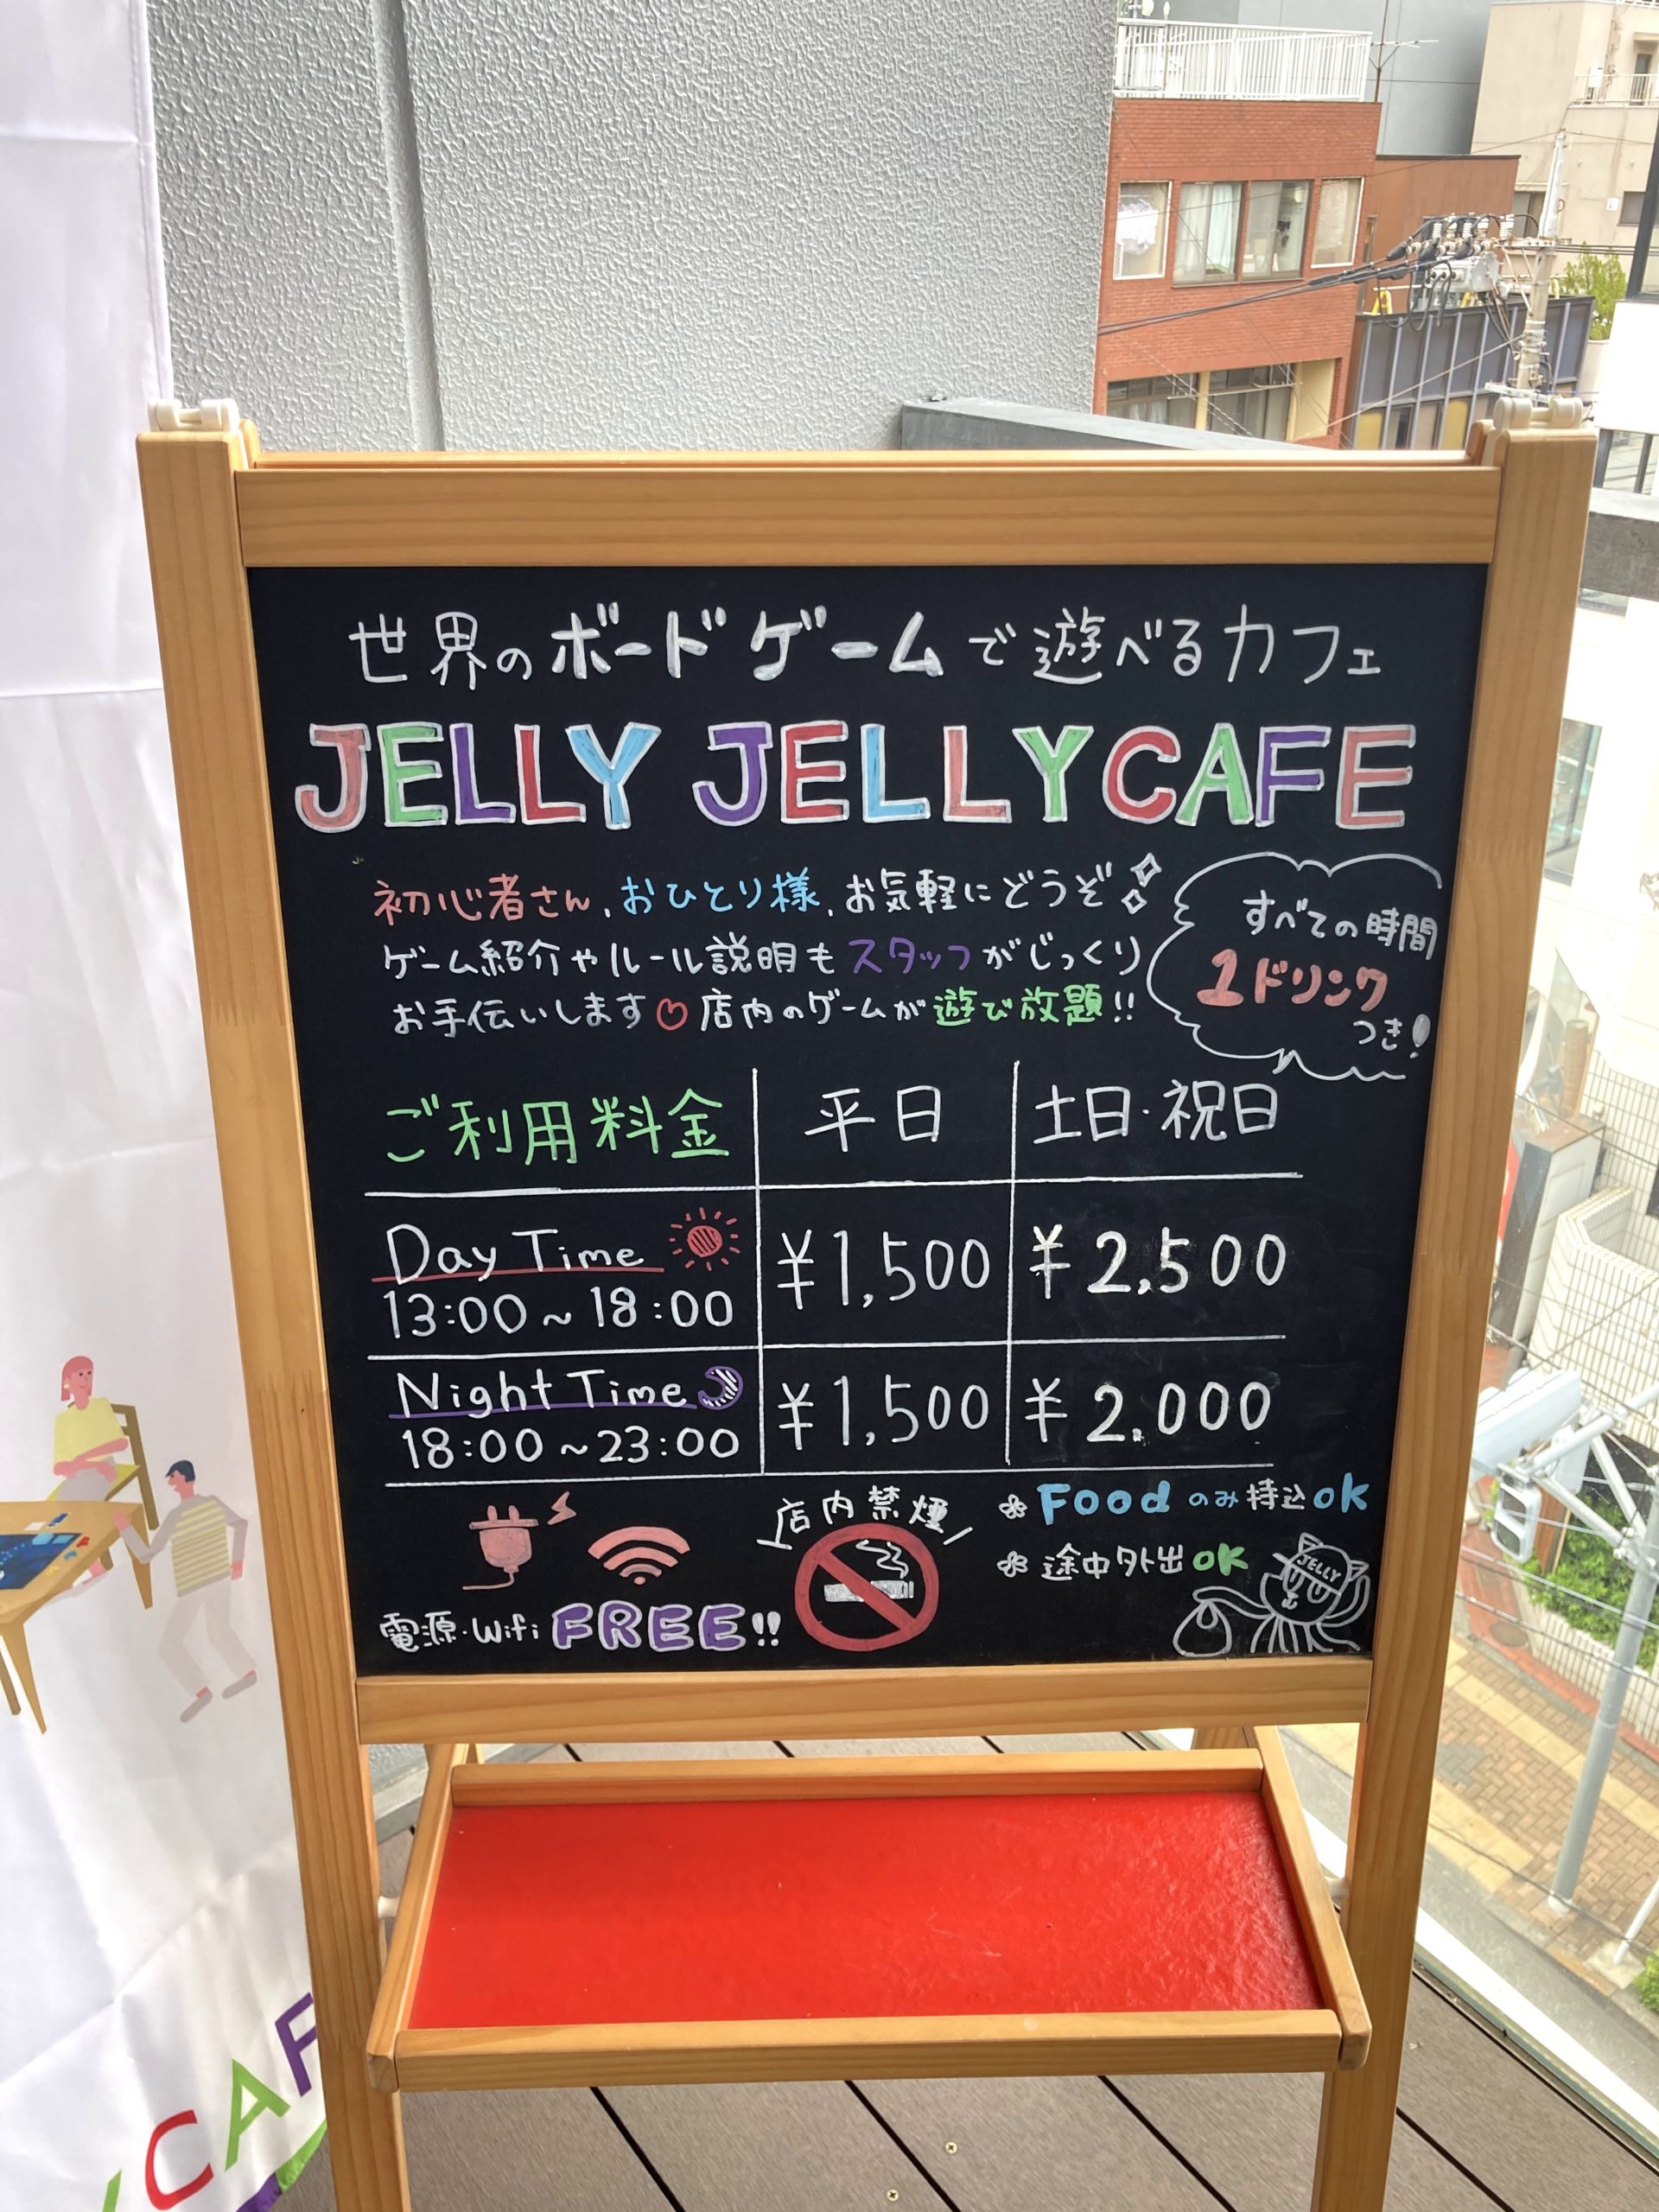 JELLY JELLY CAFE　入口　看板